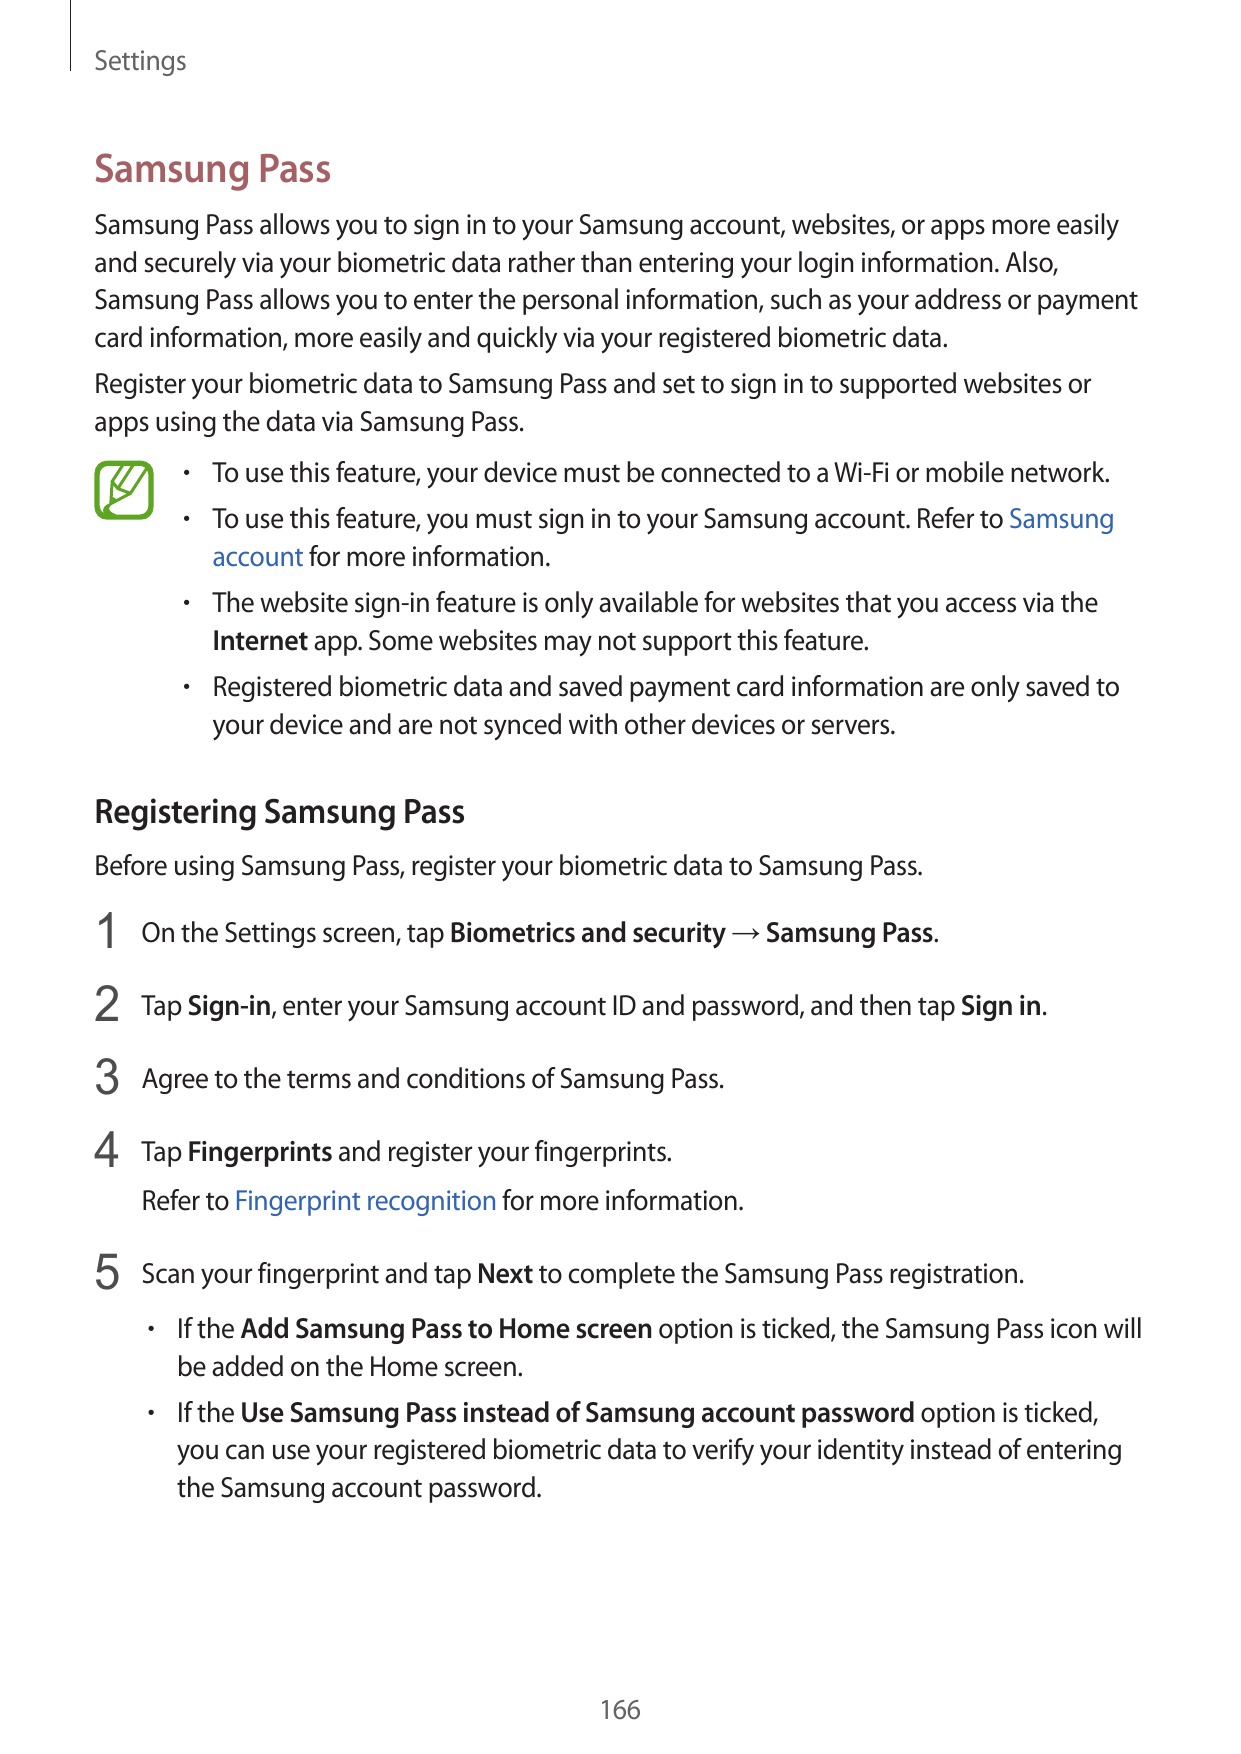 SettingsSamsung PassSamsung Pass allows you to sign in to your Samsung account, websites, or apps more easilyand securely via yo